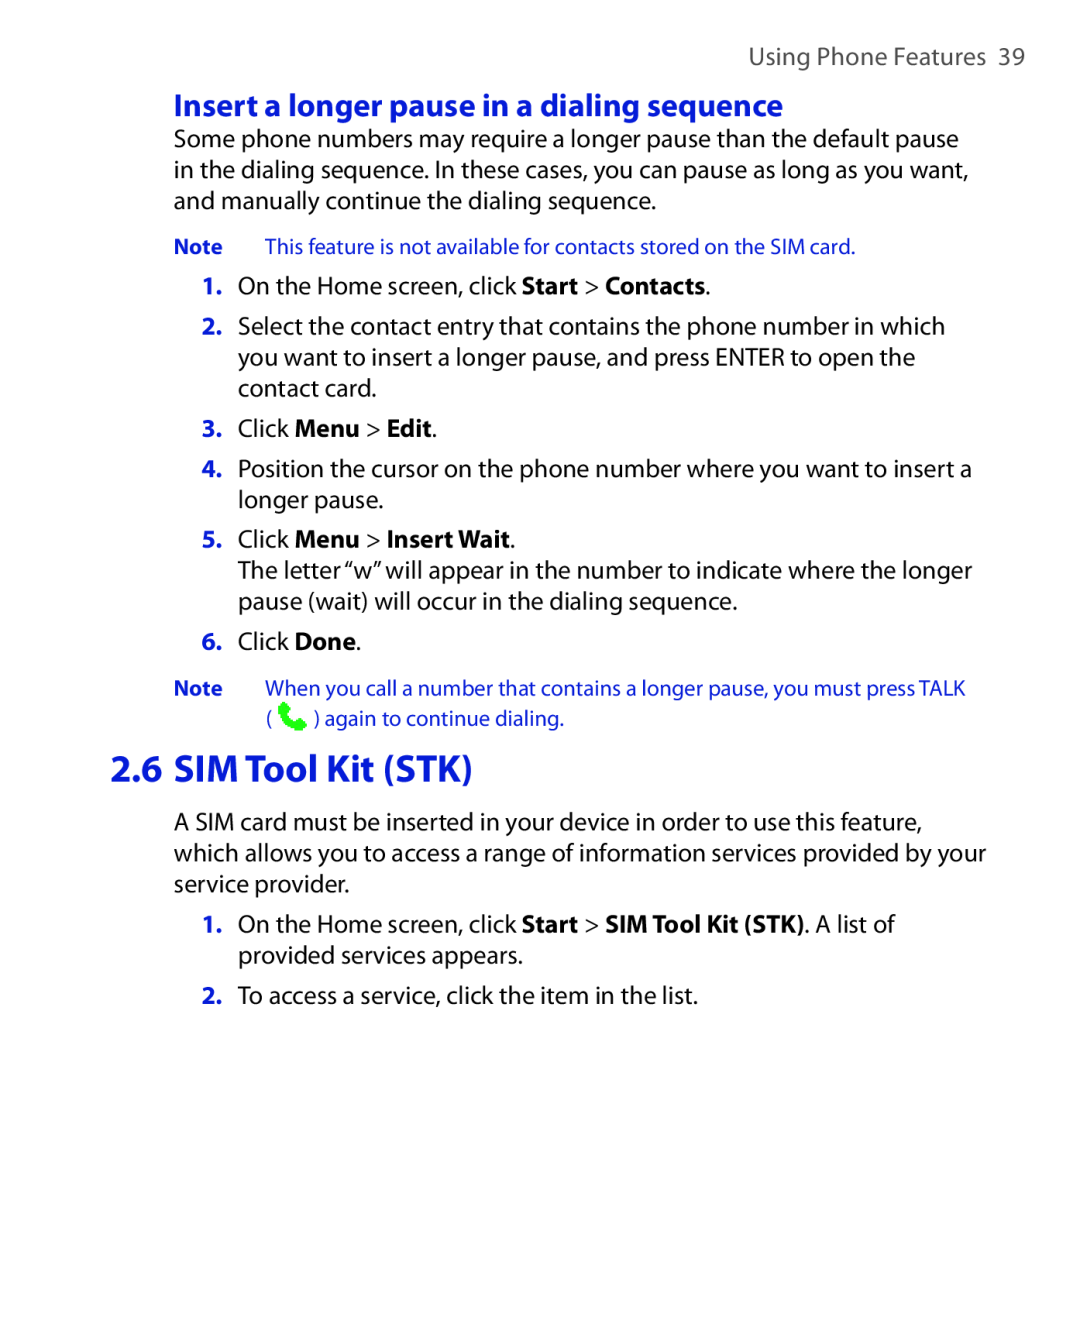 HTC HTC S621 SIM Tool Kit STK, Insert a longer pause in a dialing sequence, Using Phone Features, Click Menu Edit 